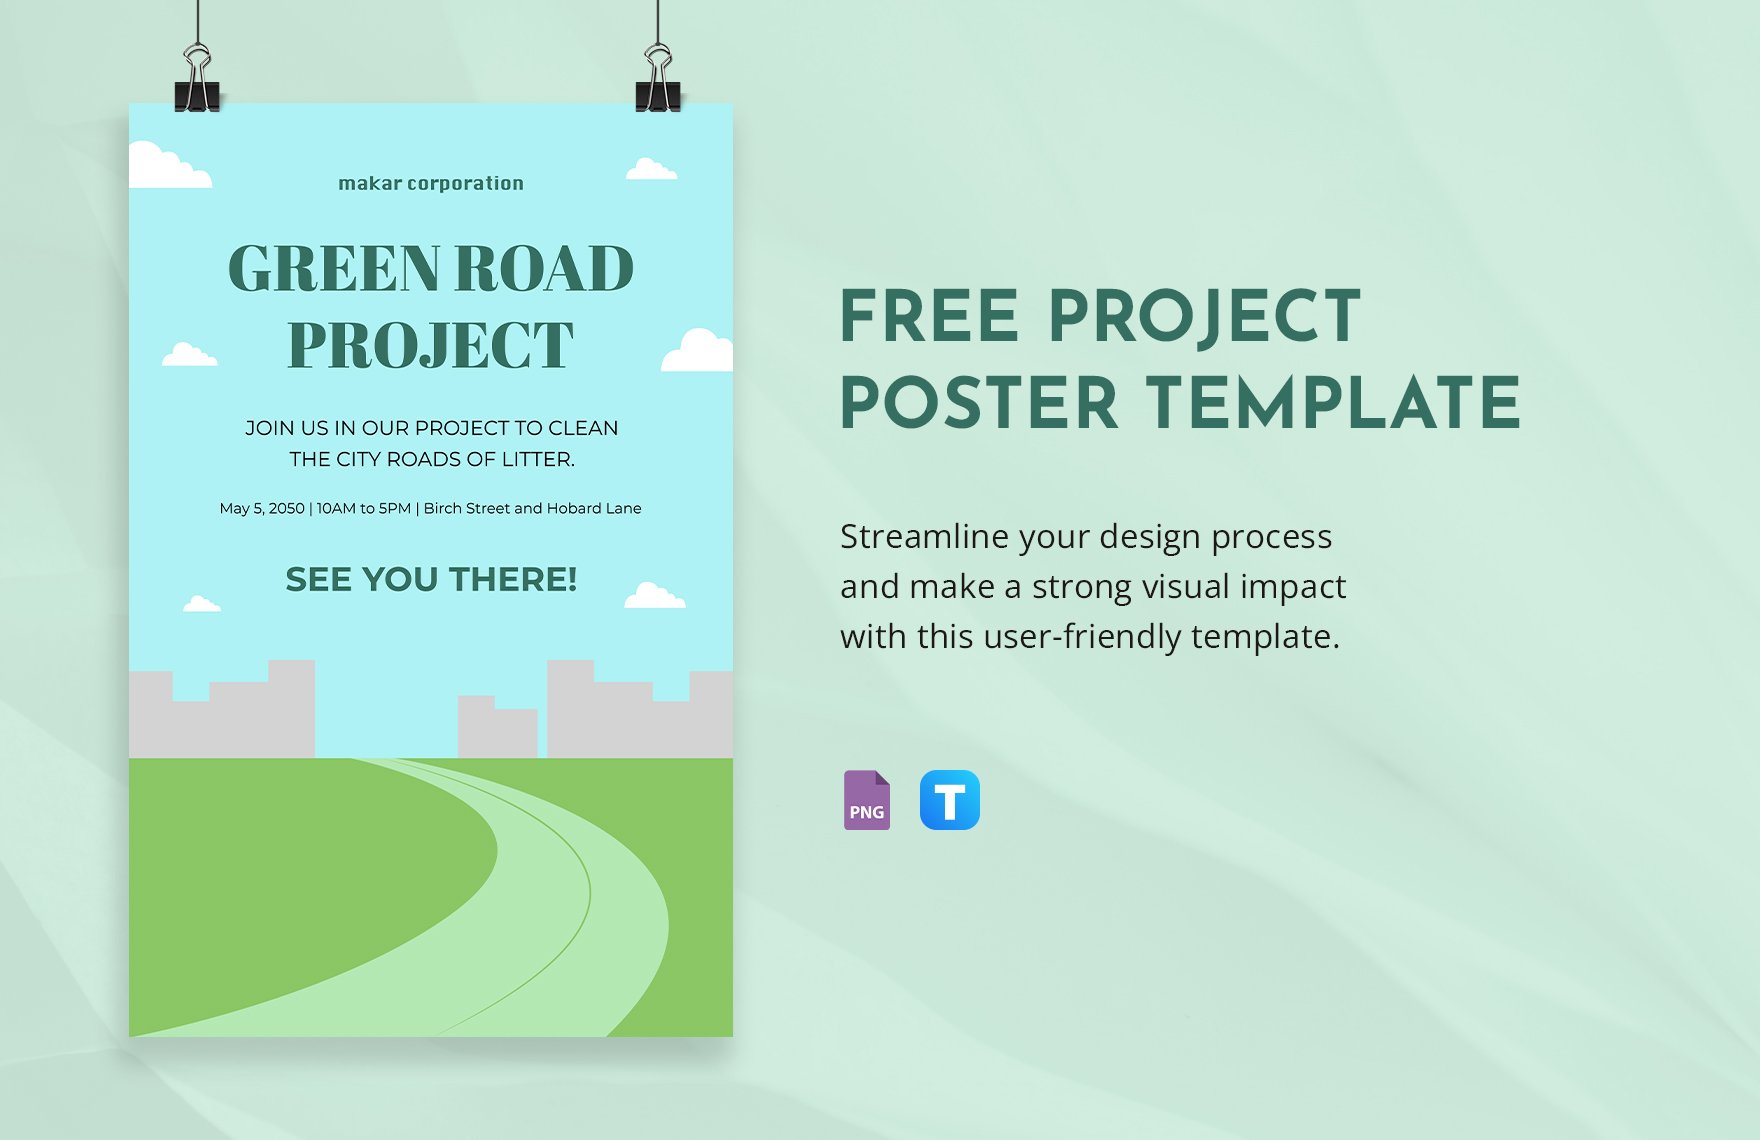 Free Project Poster Template in PNG